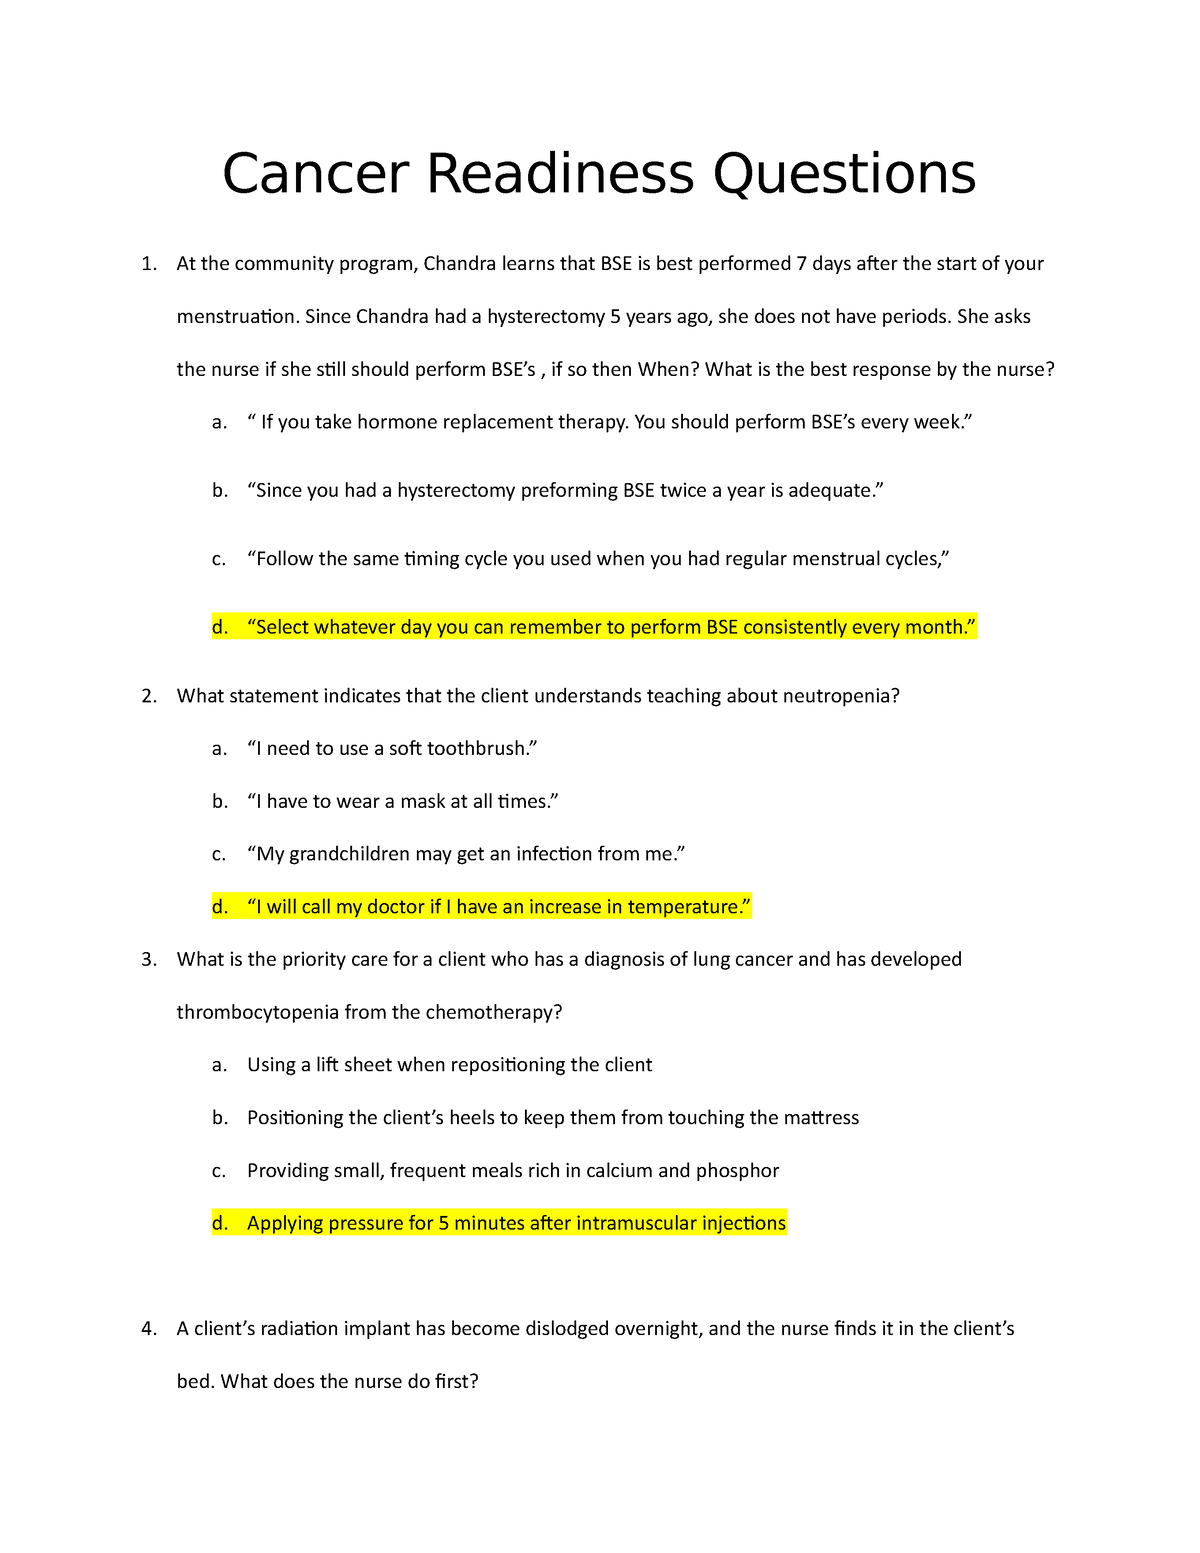 research questions cancer